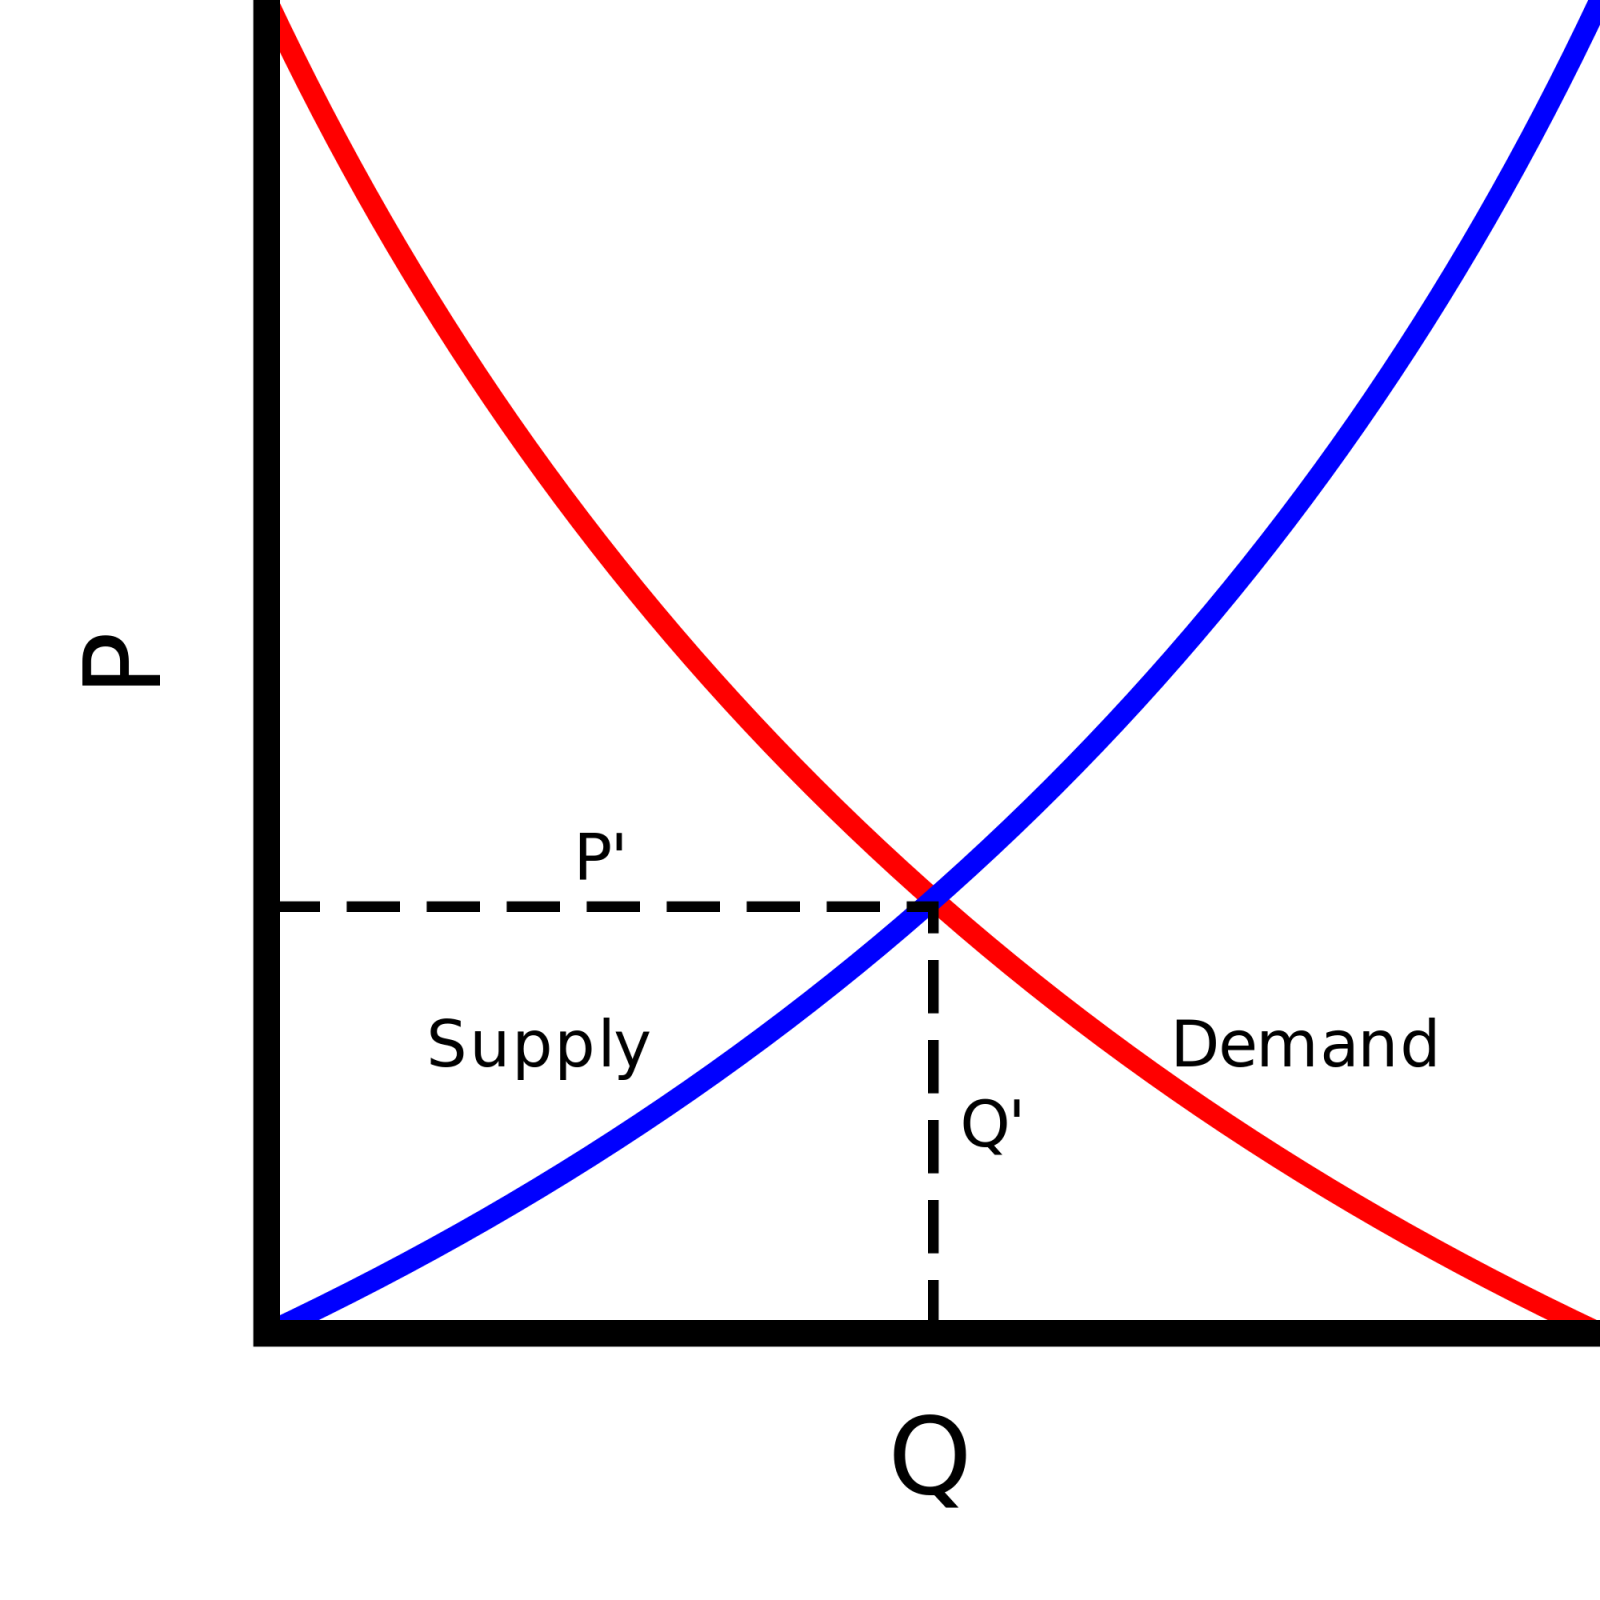 Supply and Demand Curves